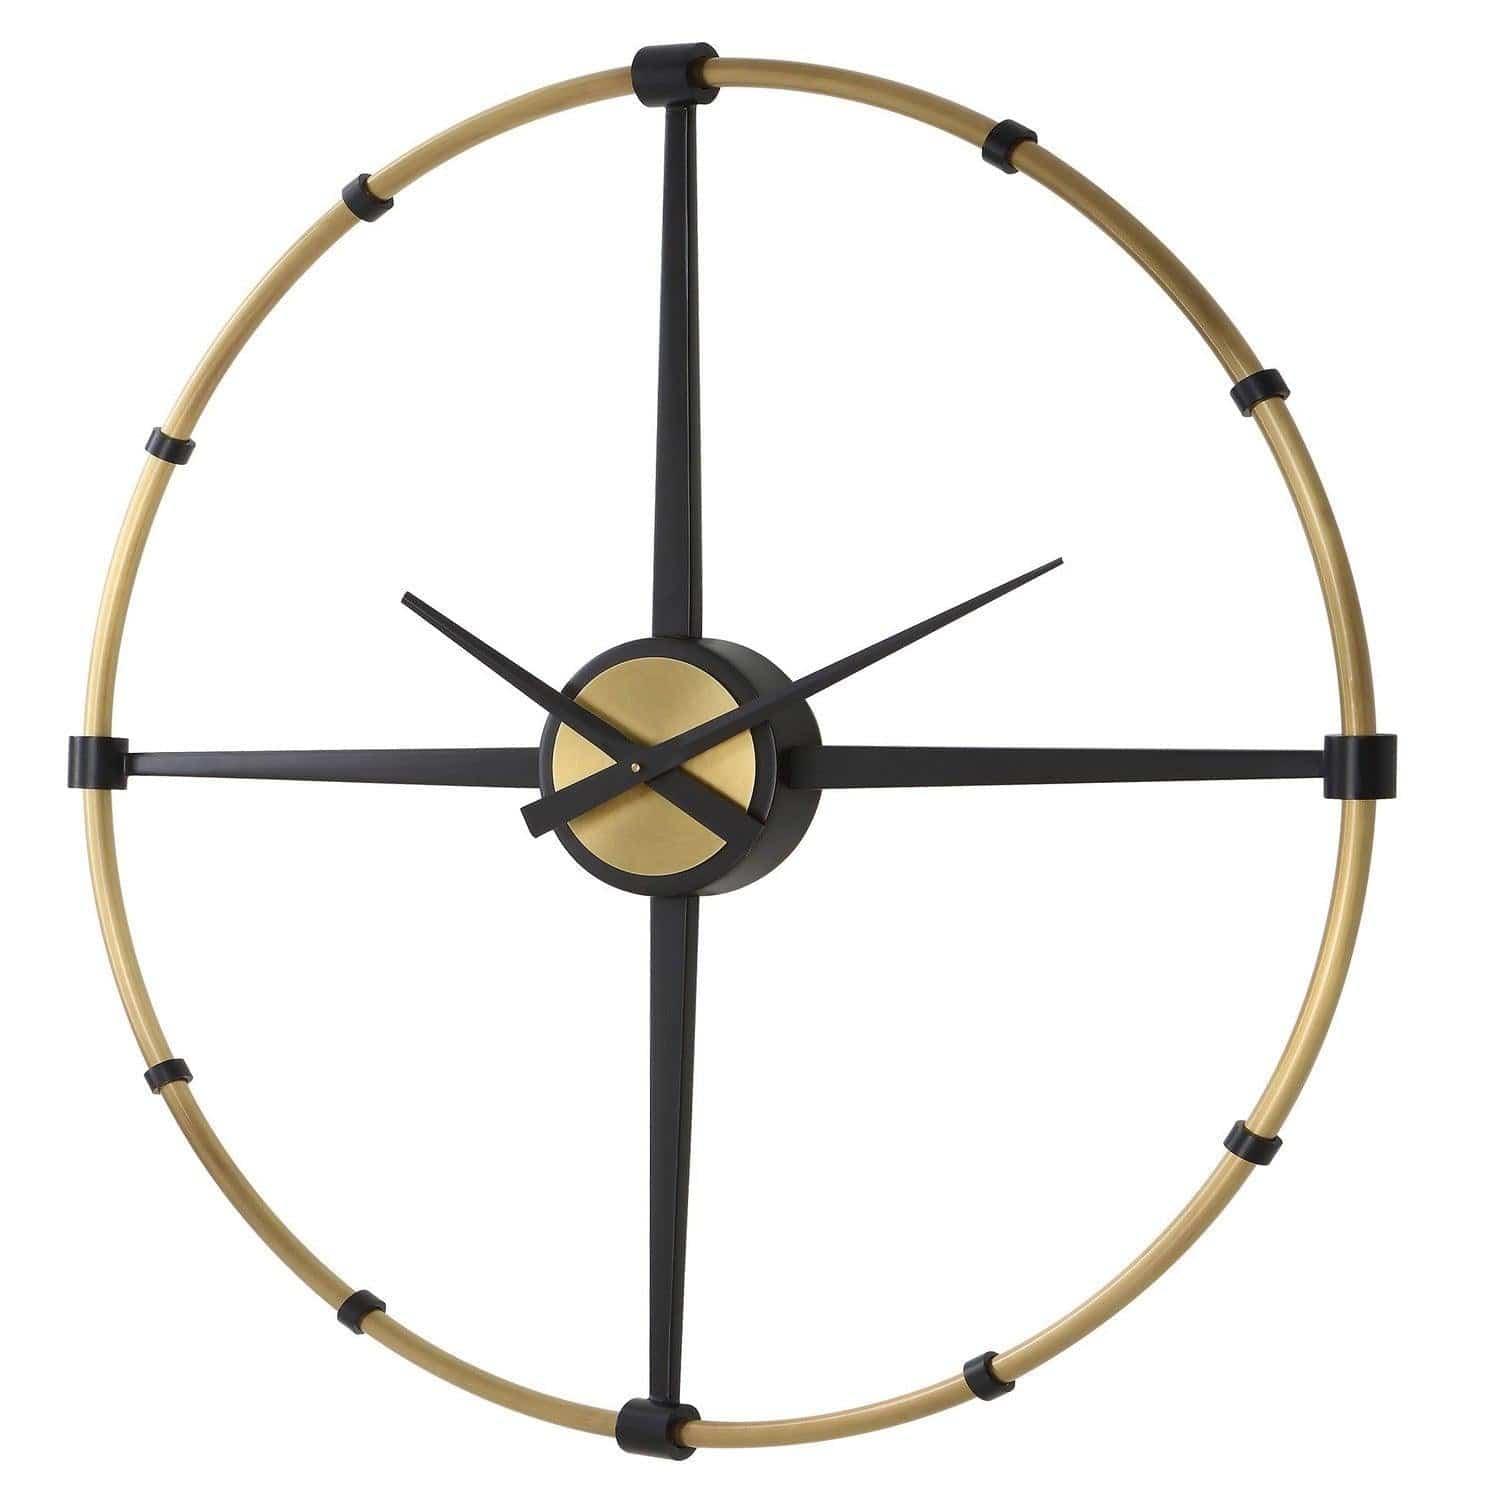 The Uttermost - Captain Wall Clock - 06462 | Montreal Lighting & Hardware